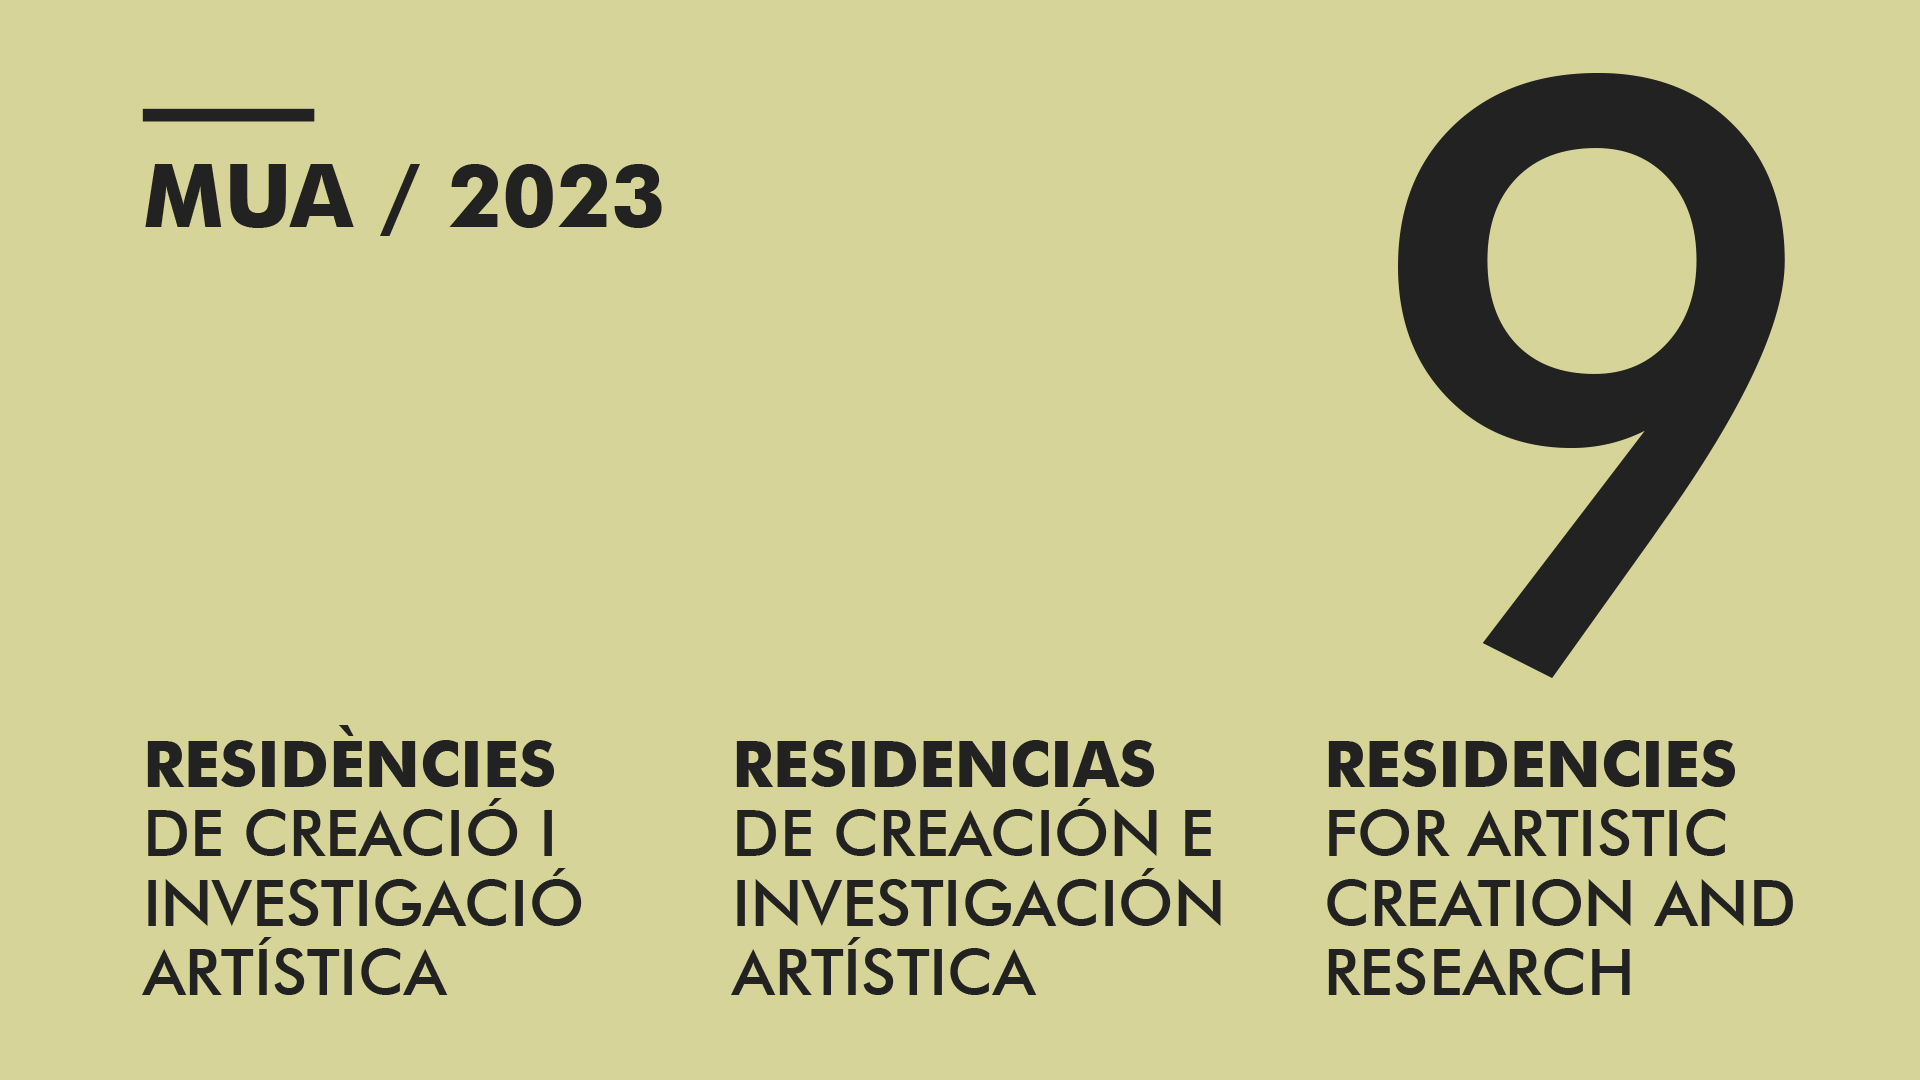 RESIDENCIES FOR ARTISTIC CREATION AND RESEARCH